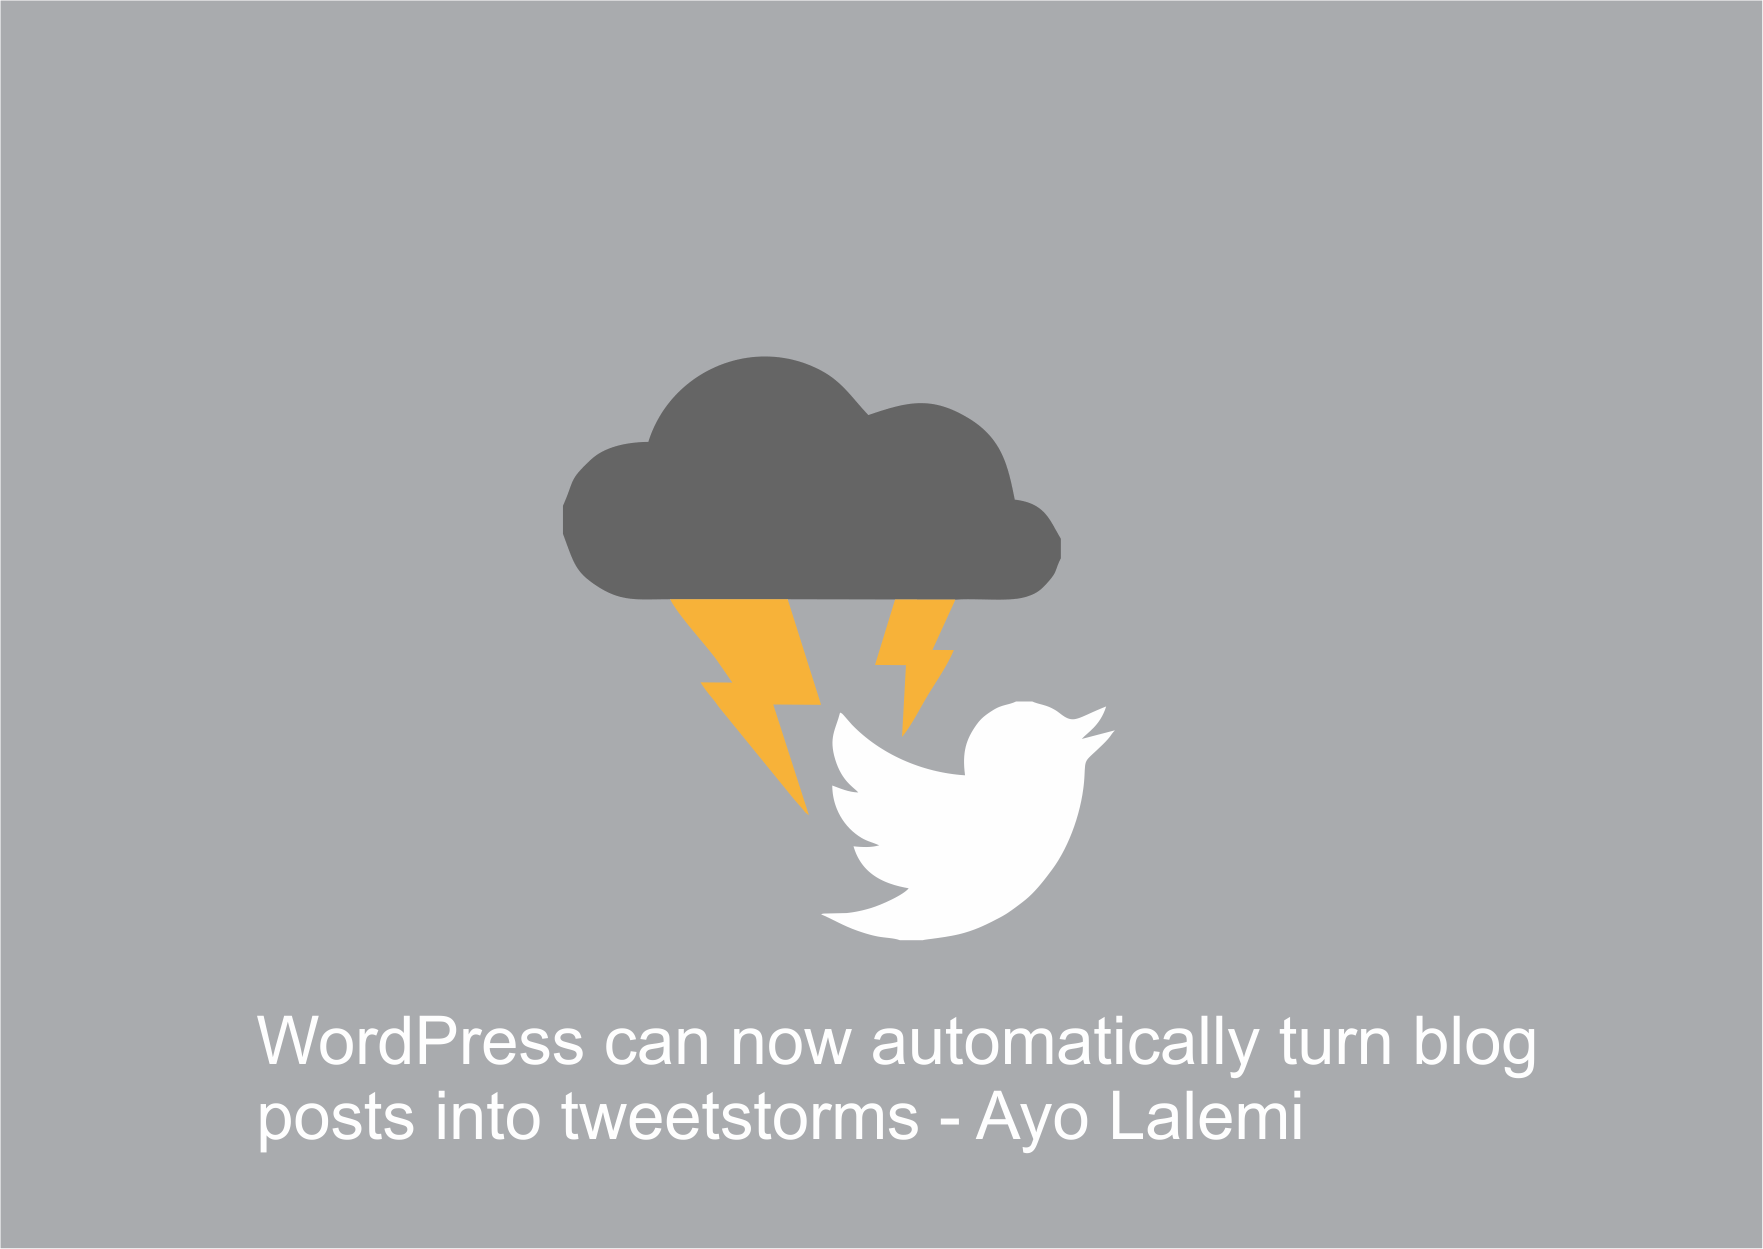 WordPress can now automatically turn blog posts into tweetstorms